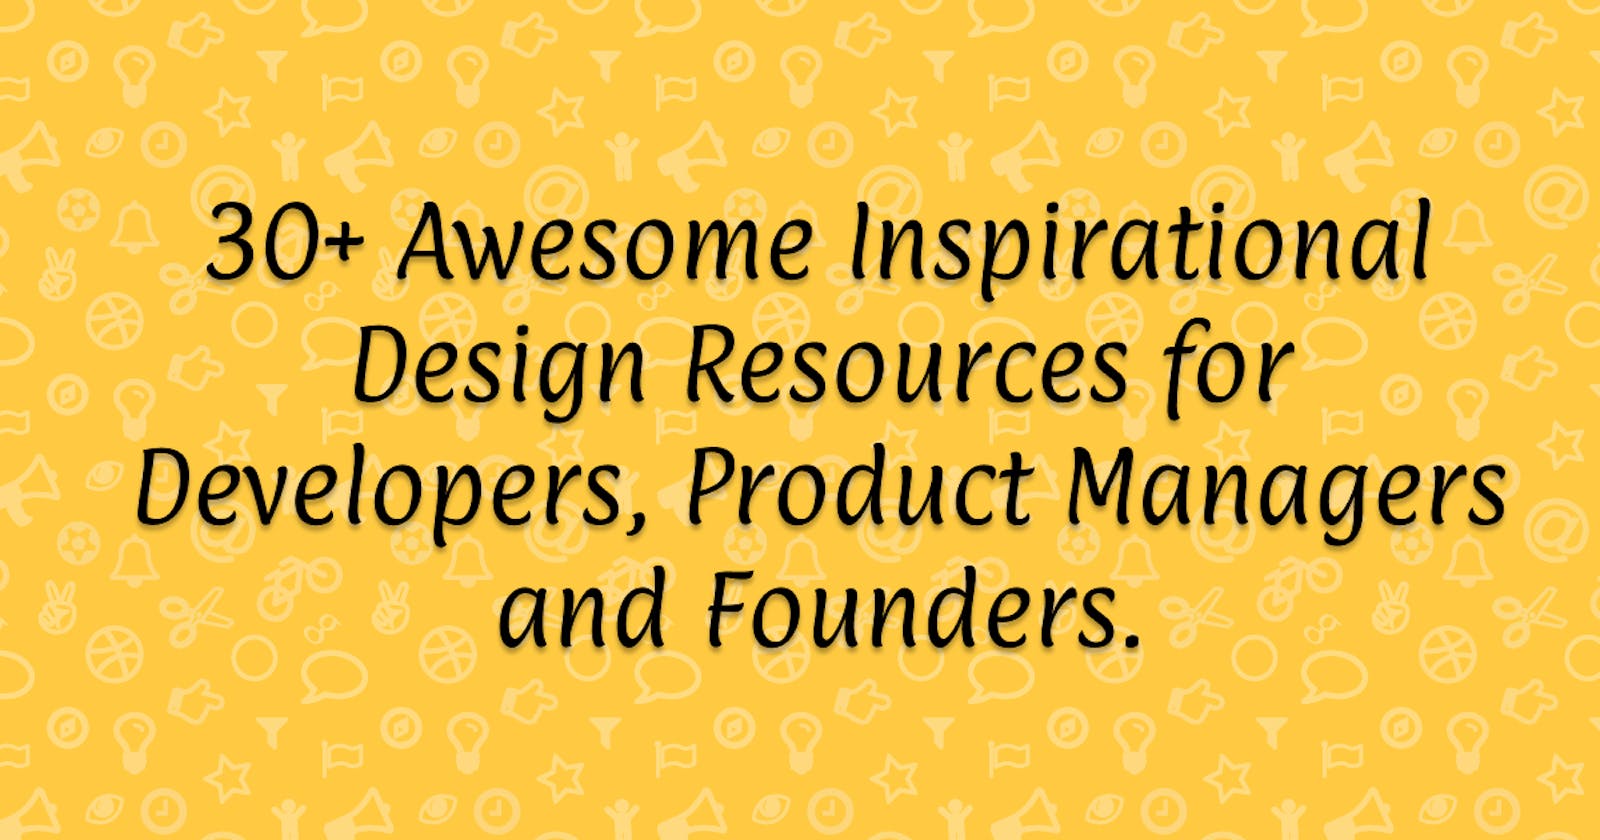 30+ Awesome Inspirational Design Resources for Developers, Product Managers, and Founders.